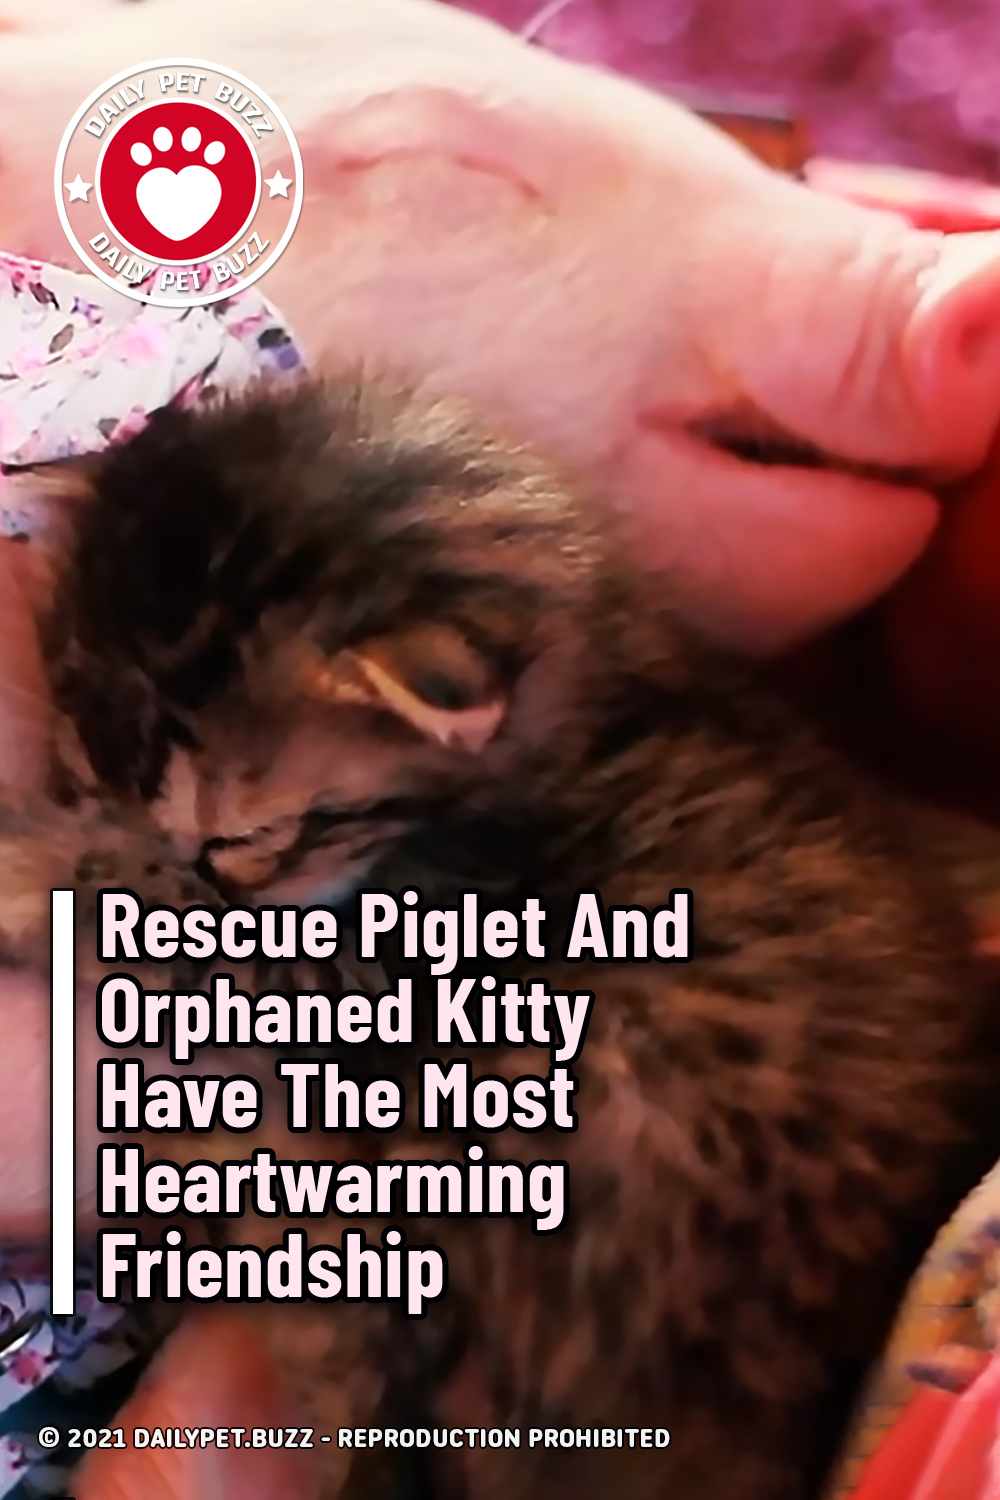 Rescue Piglet And Orphaned Kitty Have The Most Heartwarming Friendship